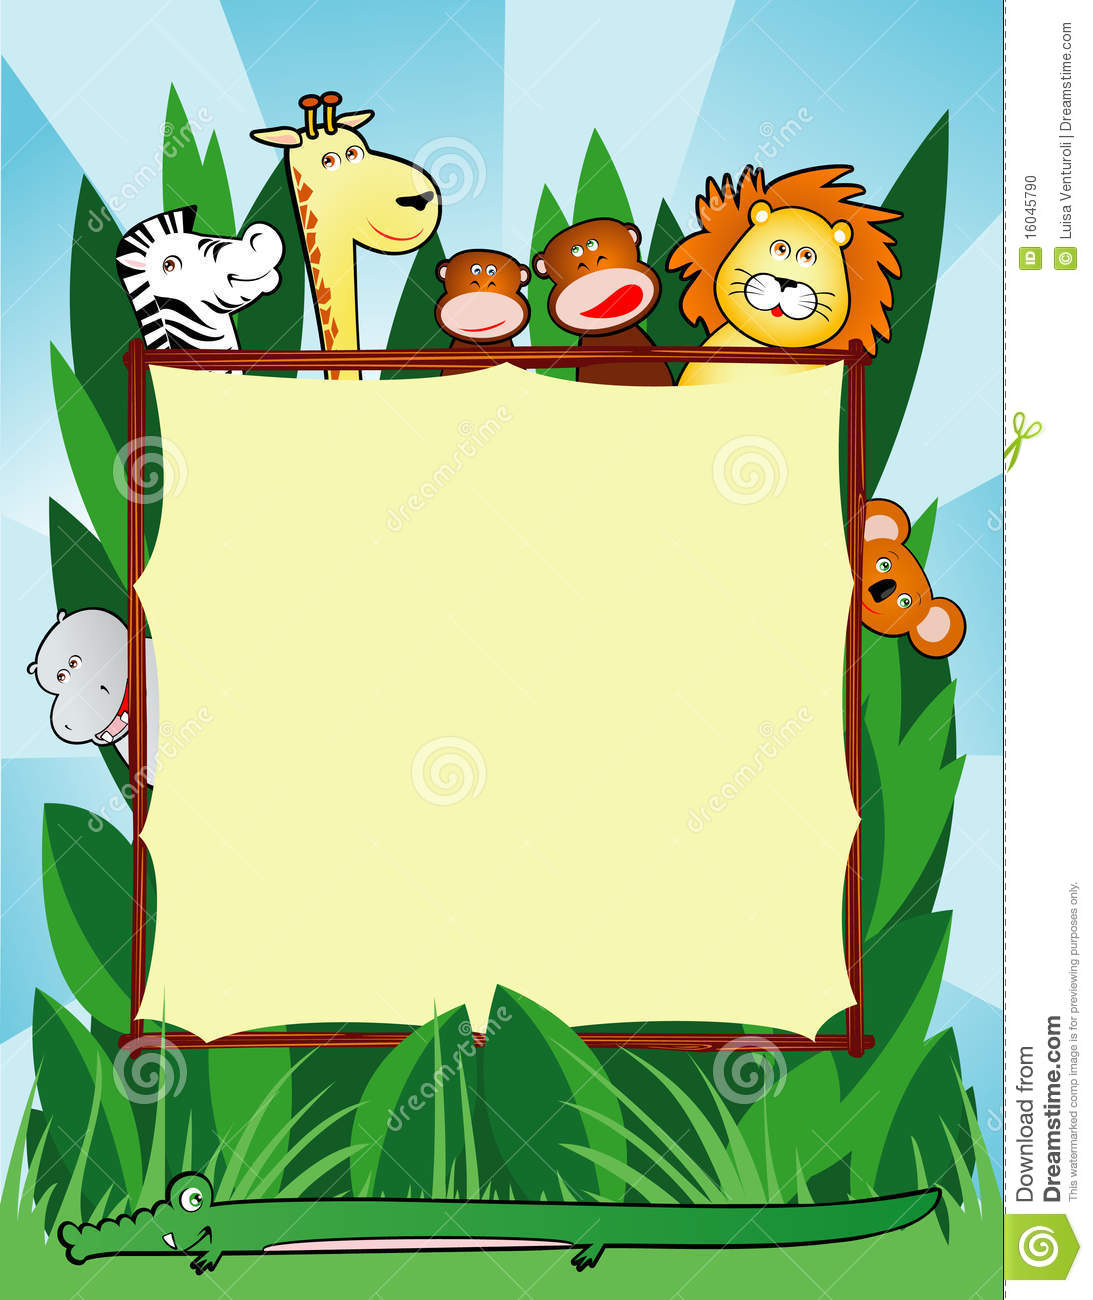 Free Wild Animal Clipart at GetDrawings.com.